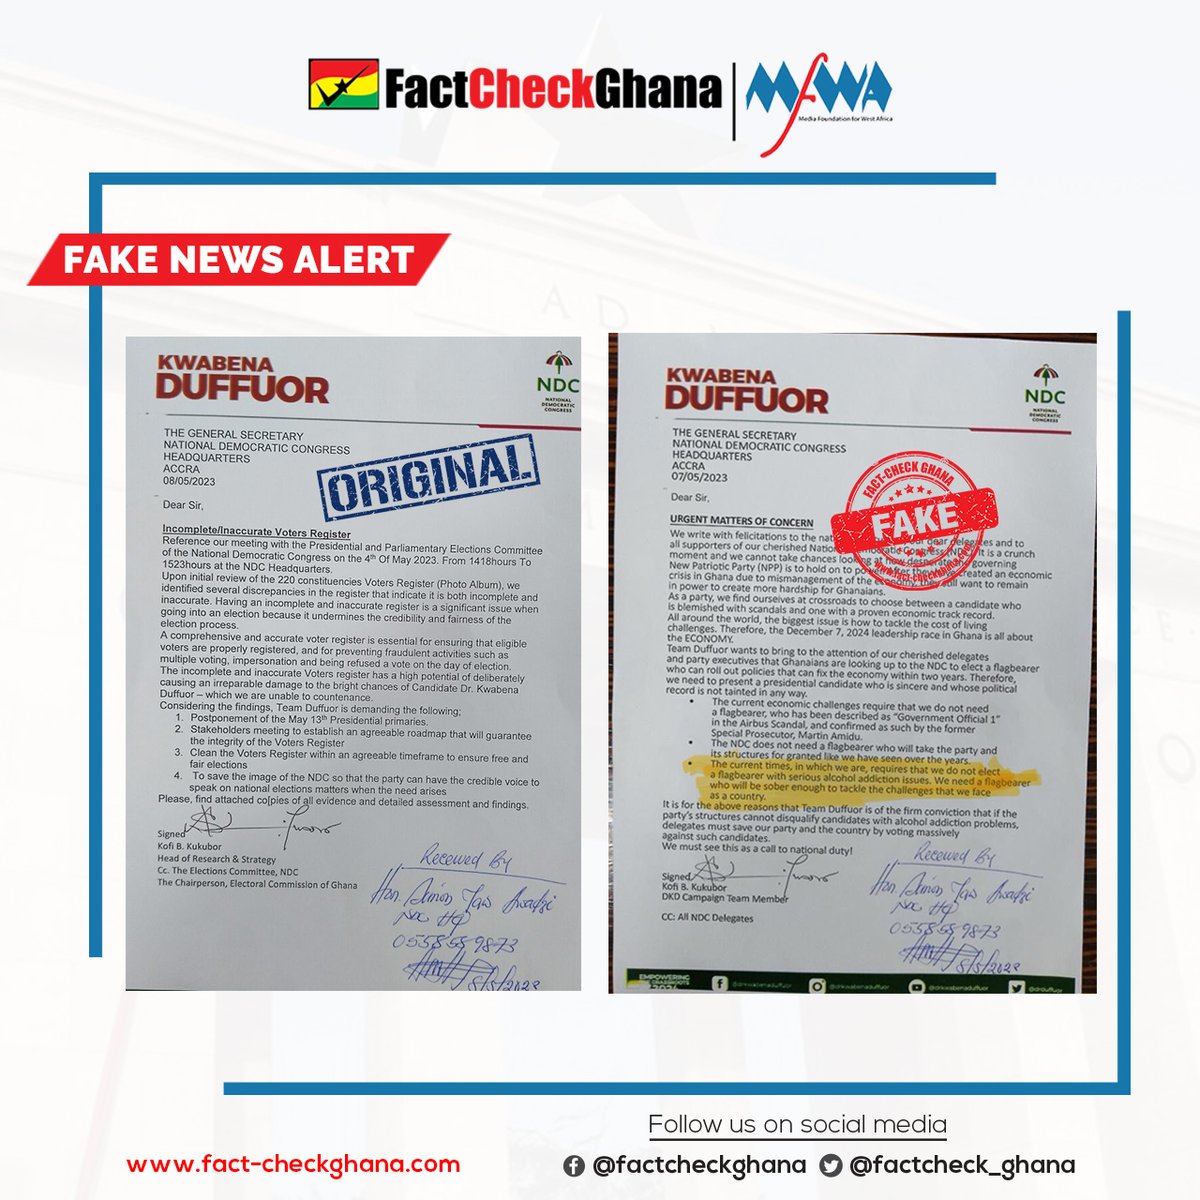 Our checks revealed that Dr Duffuor’s letter did not raise issues of alcoholism. The viral photo of the letter with a part coloured yellow has been edited. The author, Kofi B. Kukubor, told us 'They took the original letter and imposed their words and retained the signatures'.